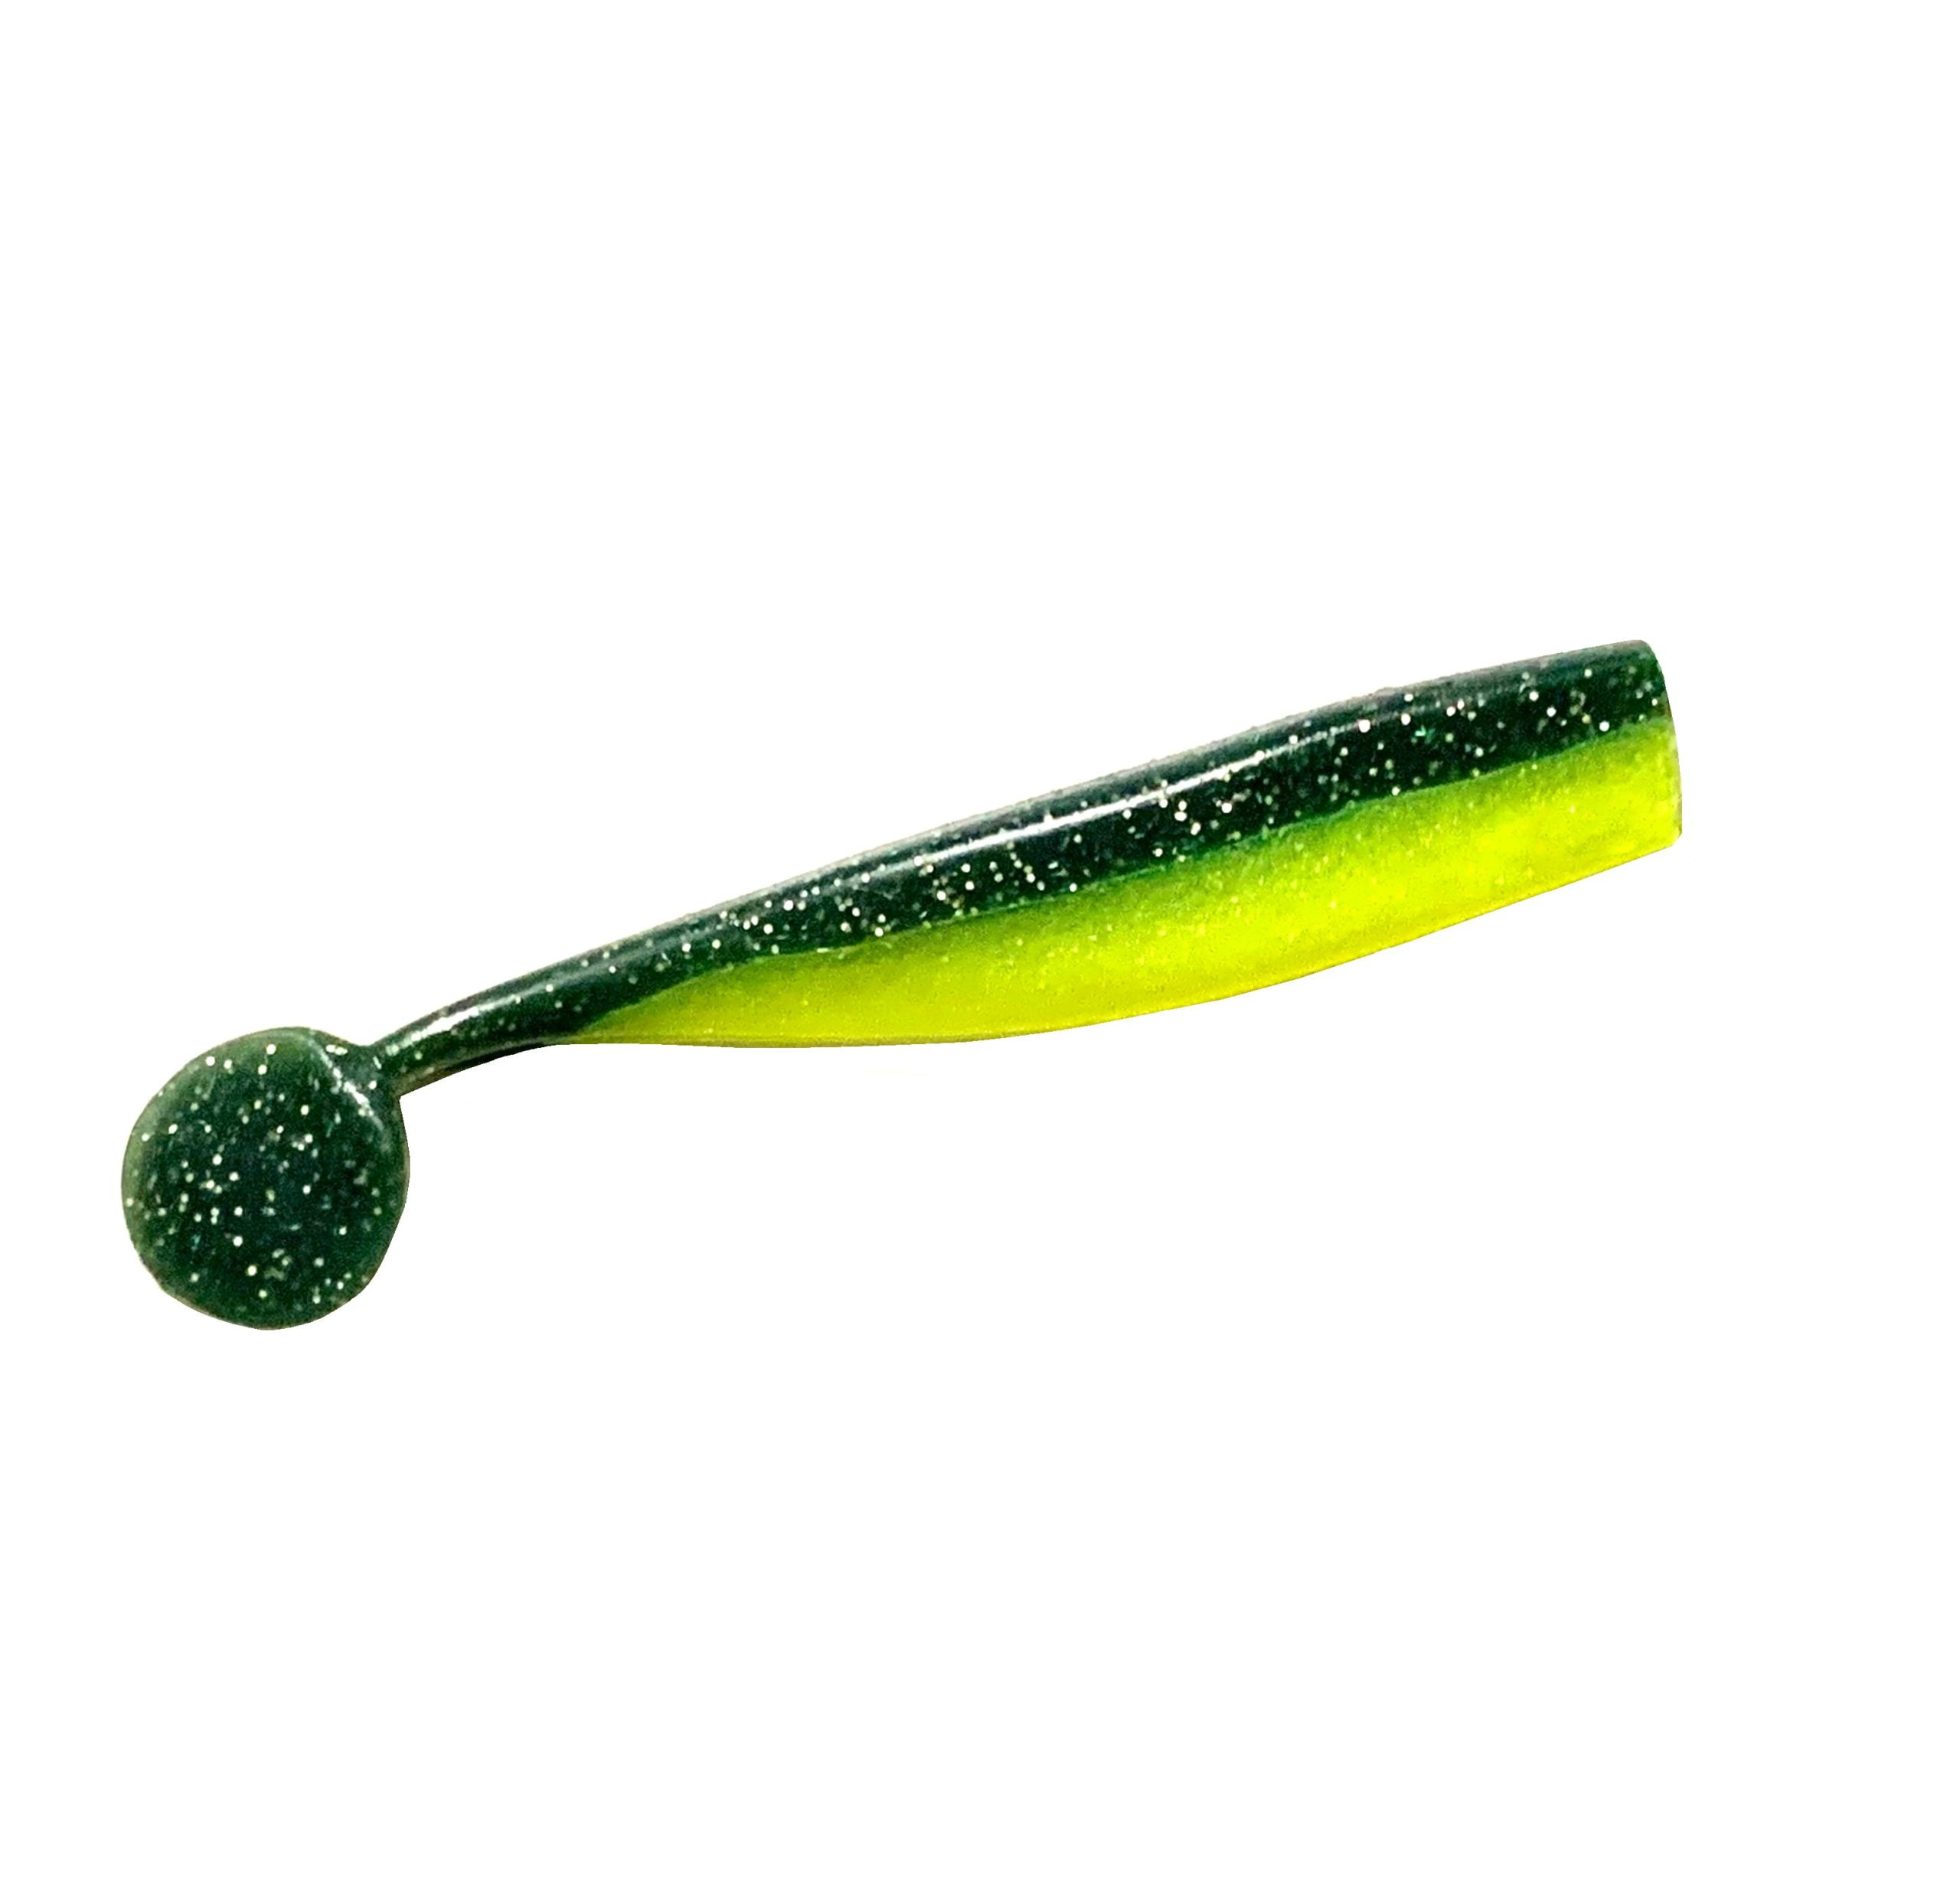 Two Color Boss Hog 9 inch Paddle Tail Swim Bait